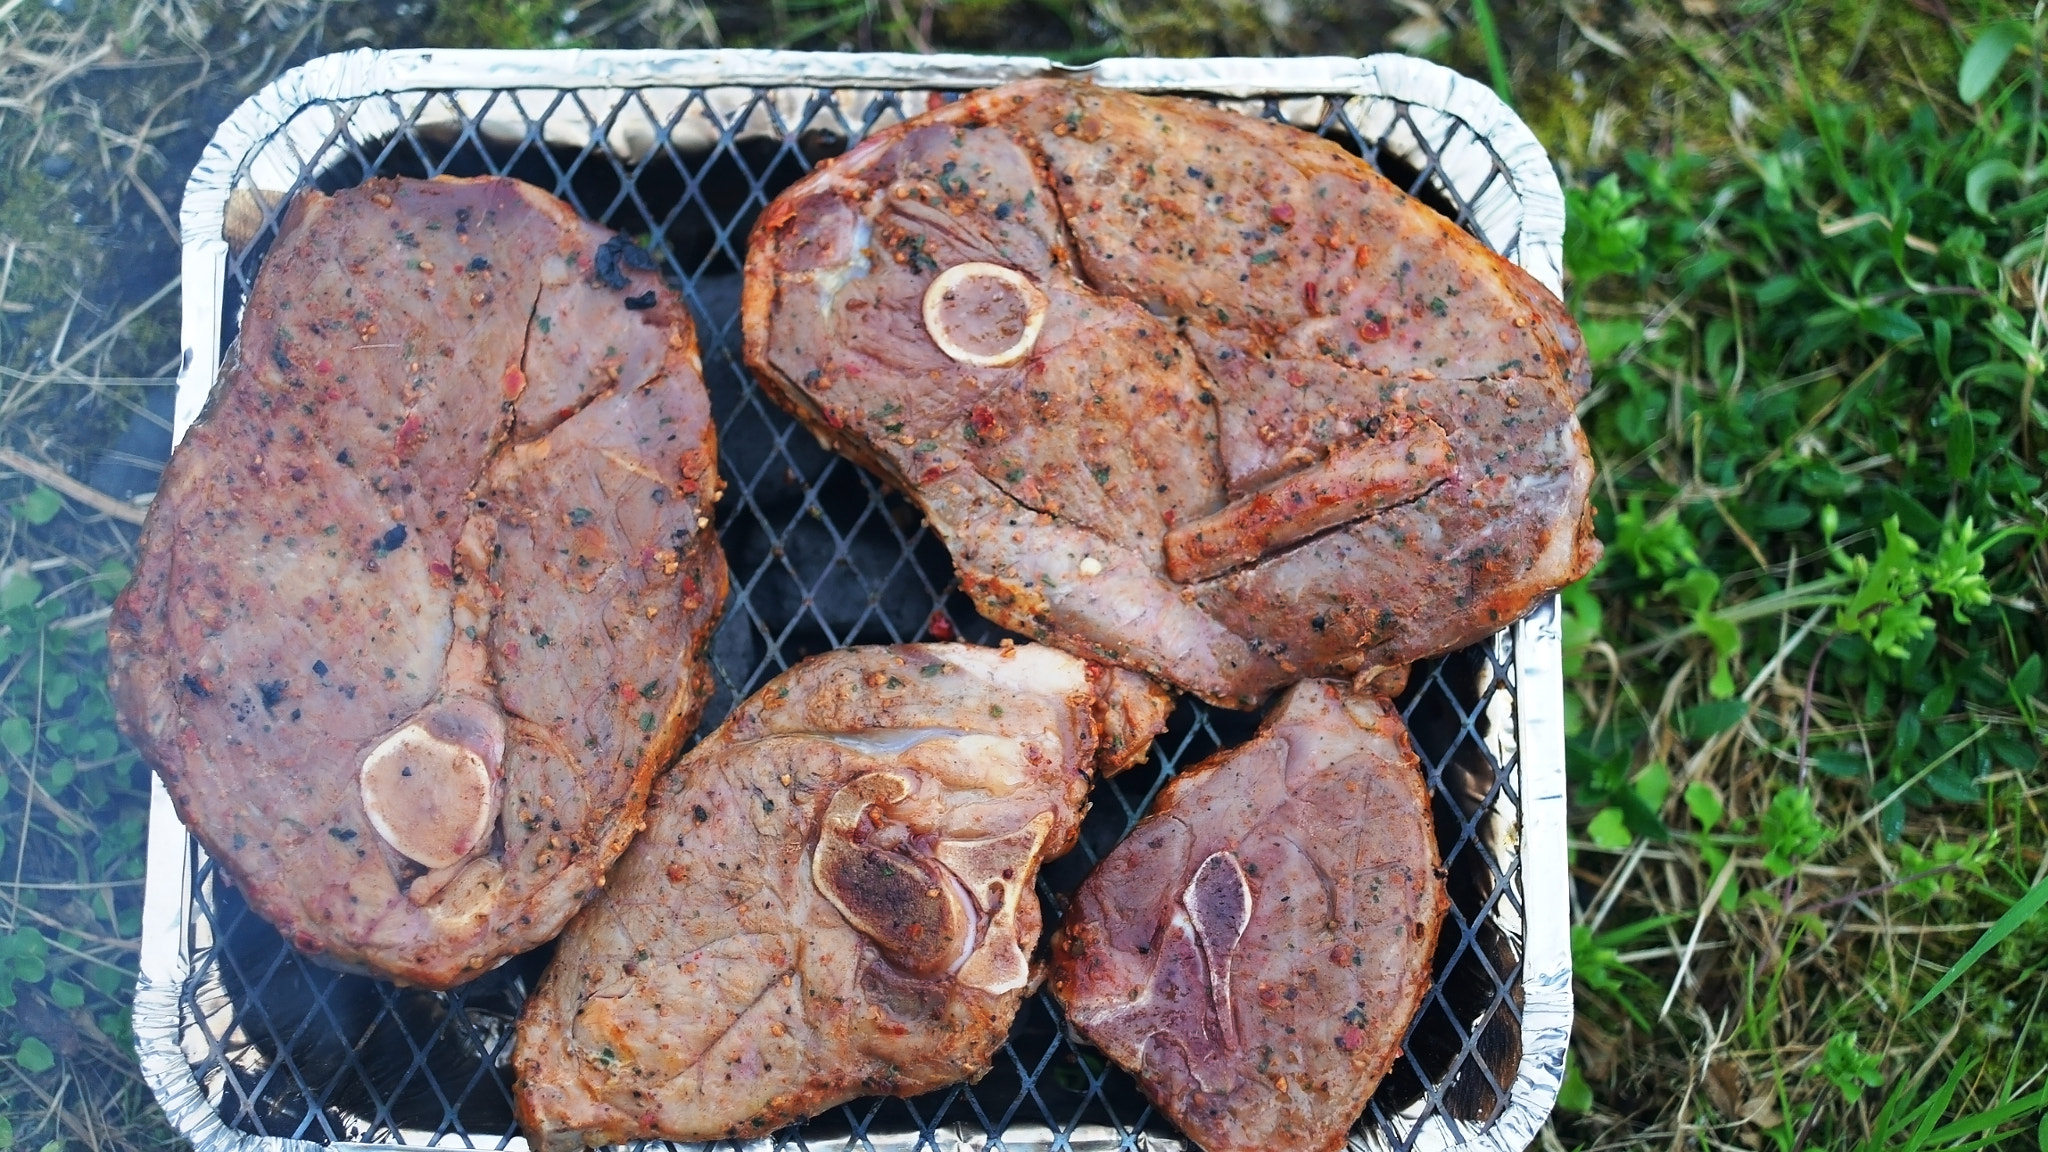 Samsung NX11 sample photo. Lamb steaks on disposable grill photography